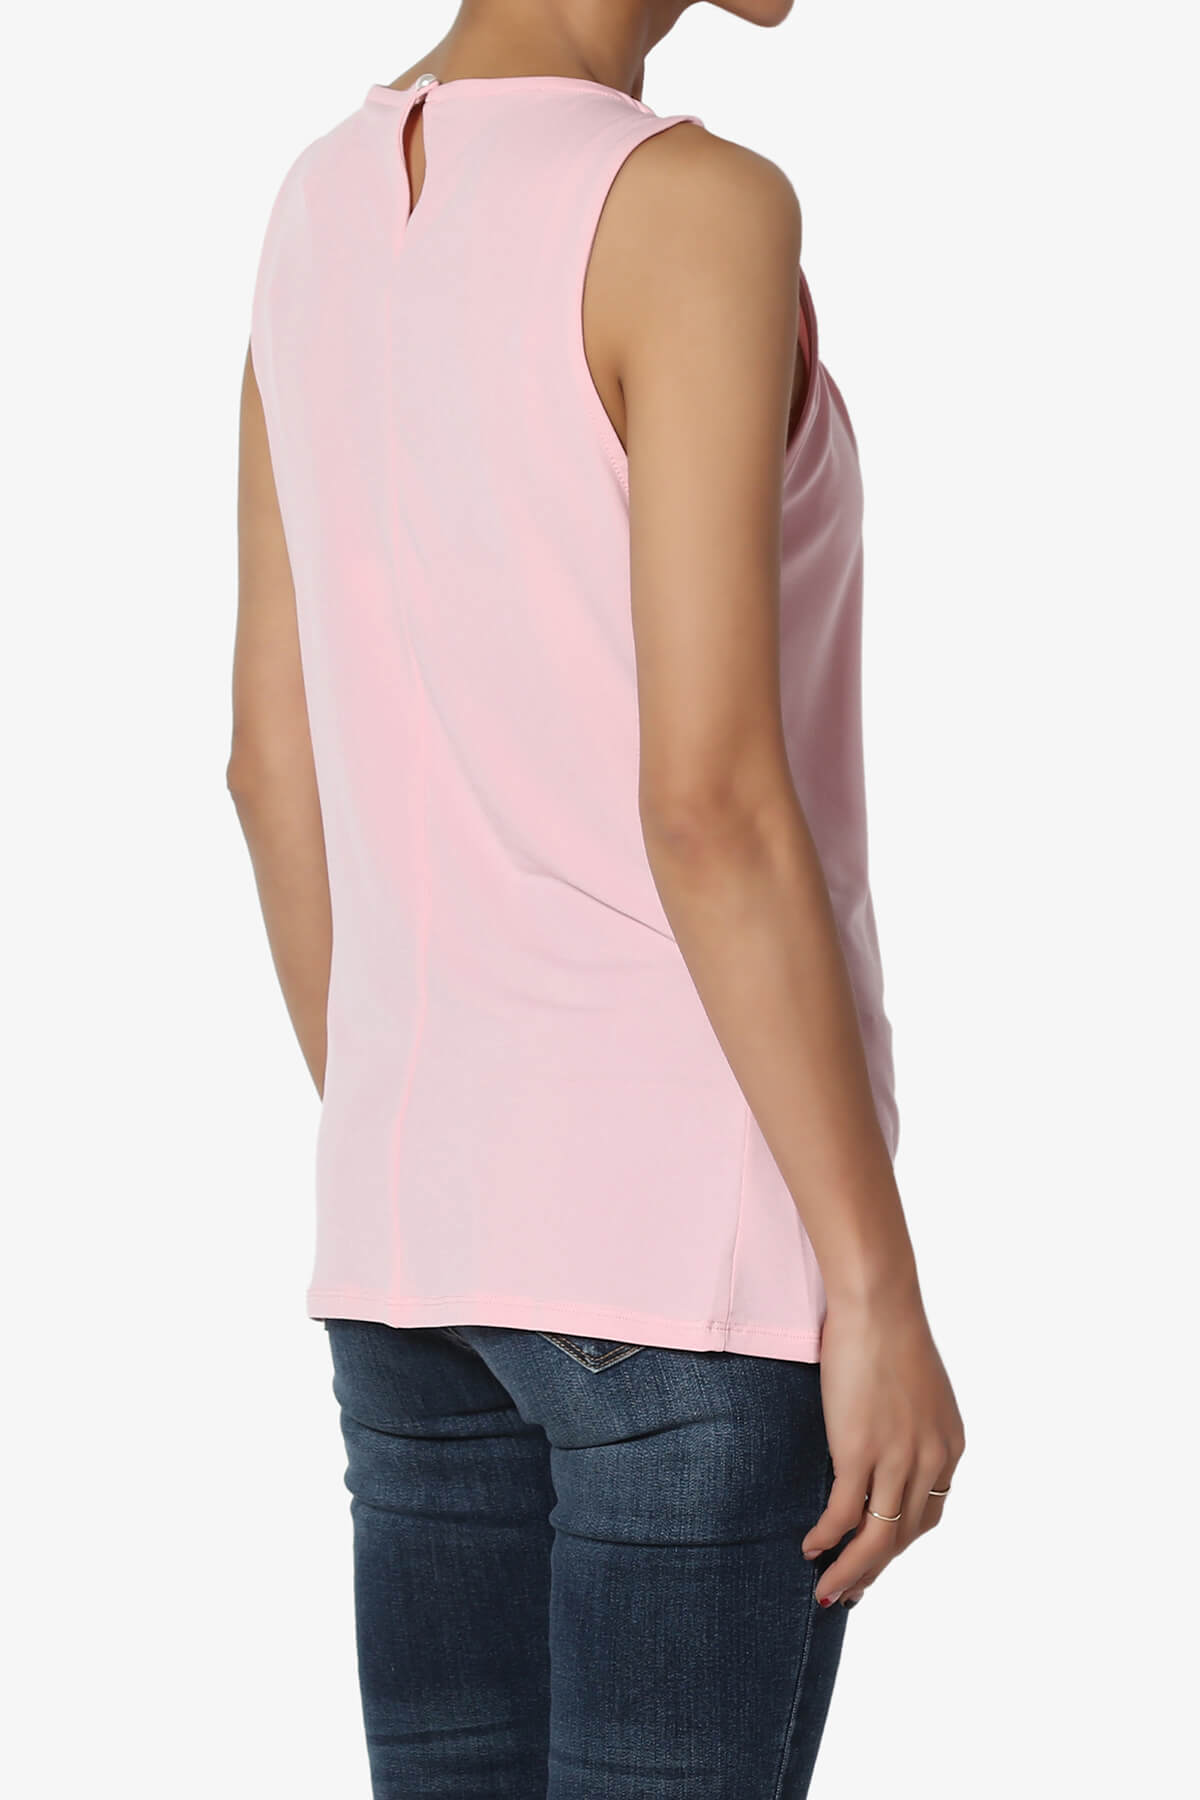 Load image into Gallery viewer, Chaffee Pleat Neck Tank Top DUSTY PINK_4
